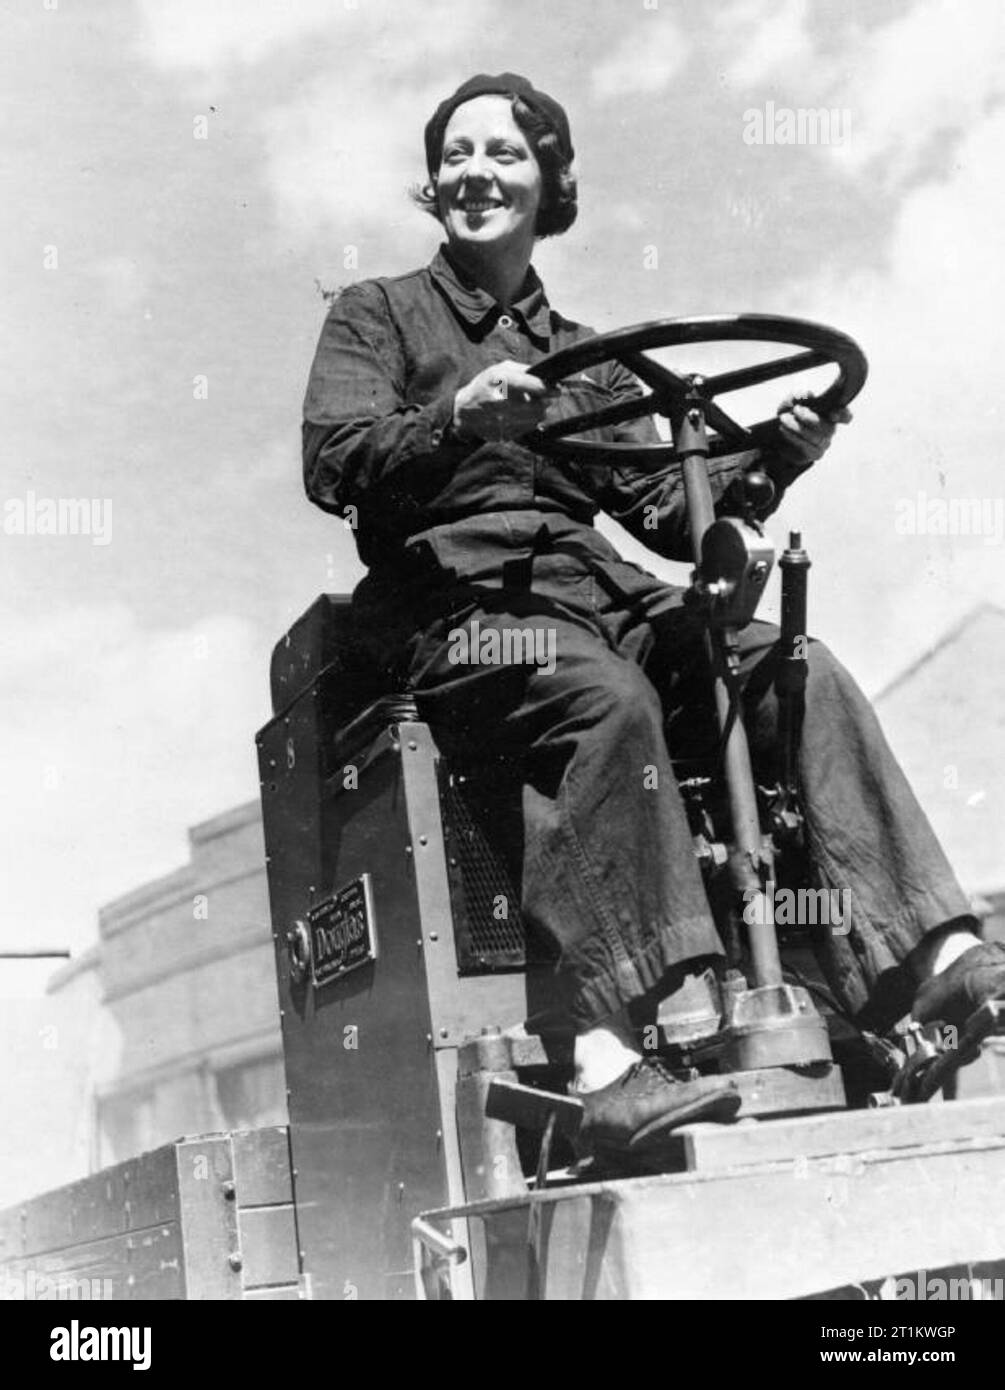 Women's War Work- Life in a Shell Factory, England, UK, 1942 Mrs C Gunnee of 3 Victoria Terrace, Broomhill, Sheffield drives a Douglas forklift truck at a shell factory somewhere in Yorkshire. She has two children and her husband is also a munitions worker. Stock Photo